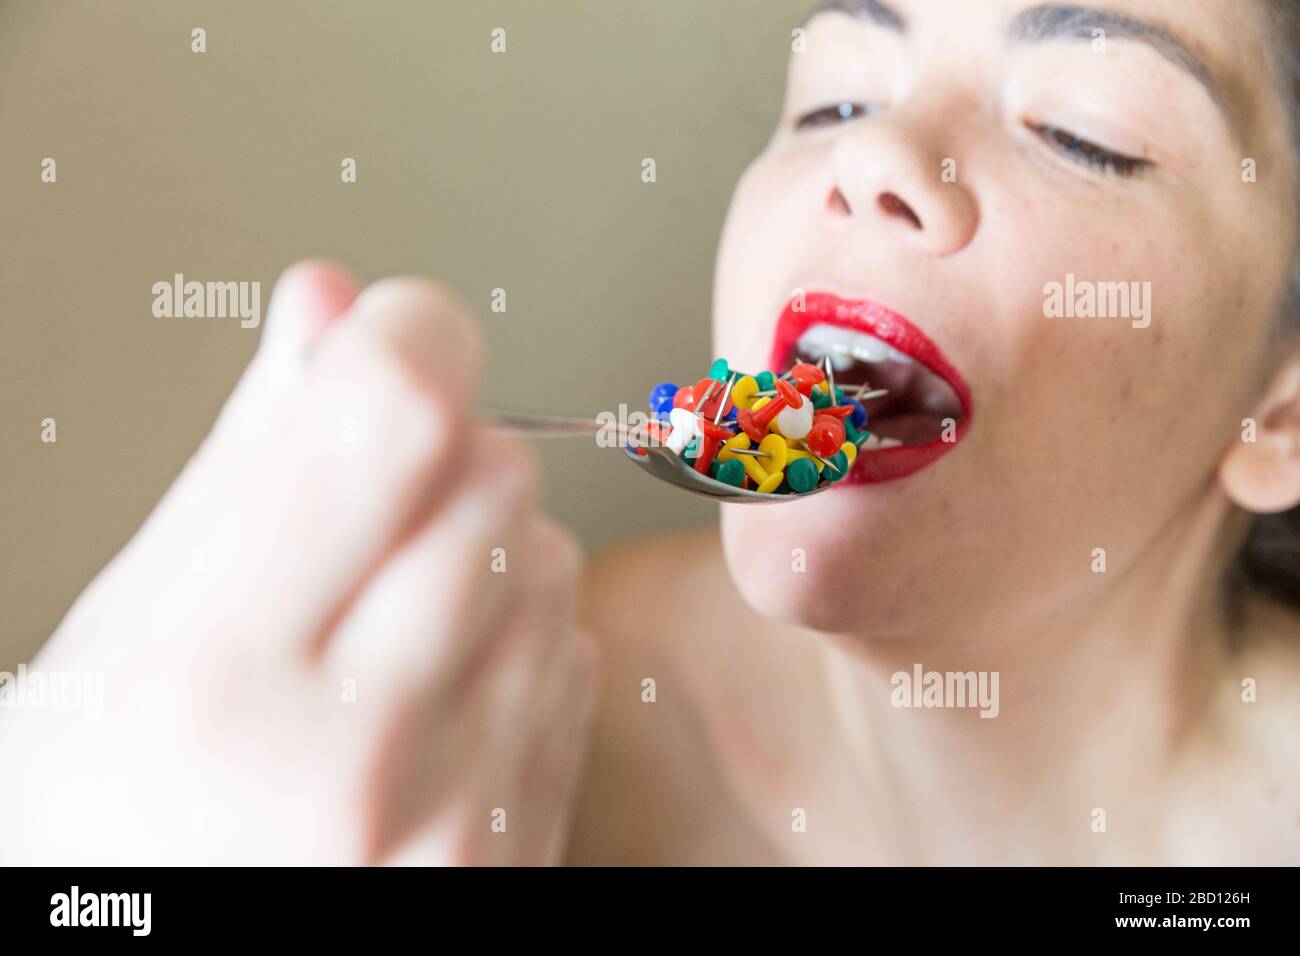 Beautiful girl with red lipstick eating colored sharp drawing pins from a  metallic spoon. Conceptual image Stock Photo - Alamy